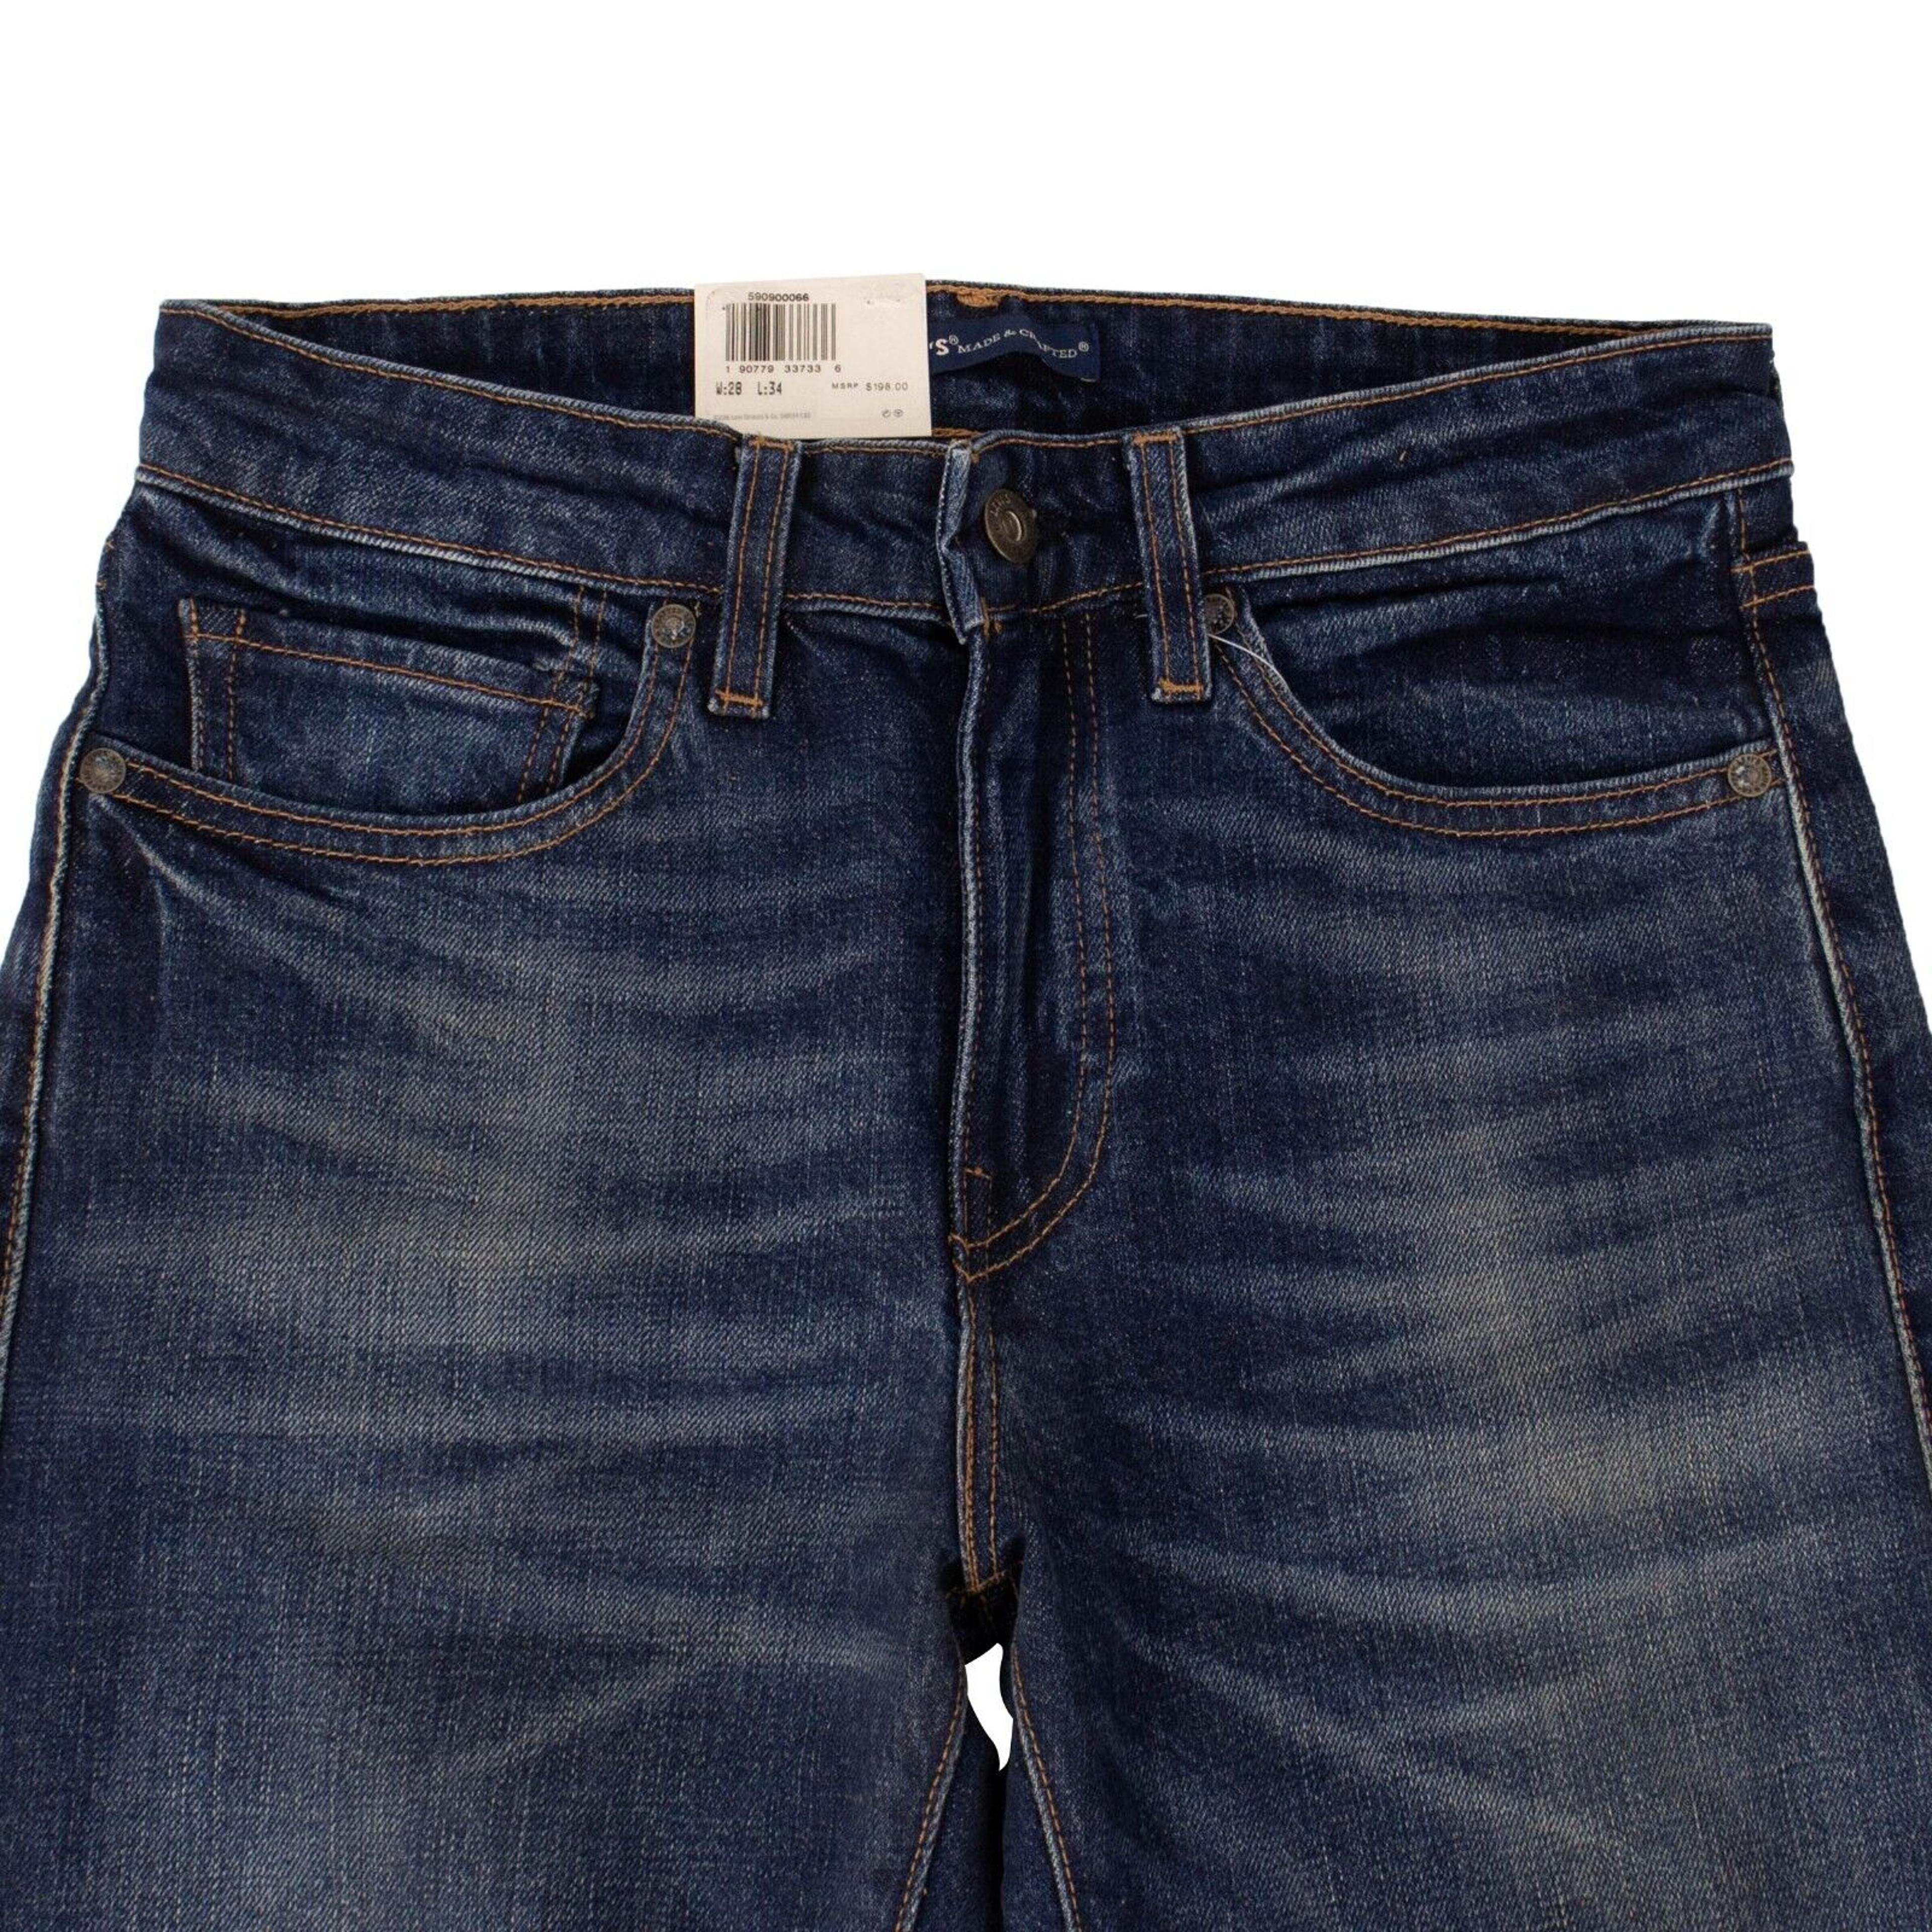 Alternate View 2 of Levi'S Made & Crafted Chiba Needle Narrow Denim Jeans - Dark Was